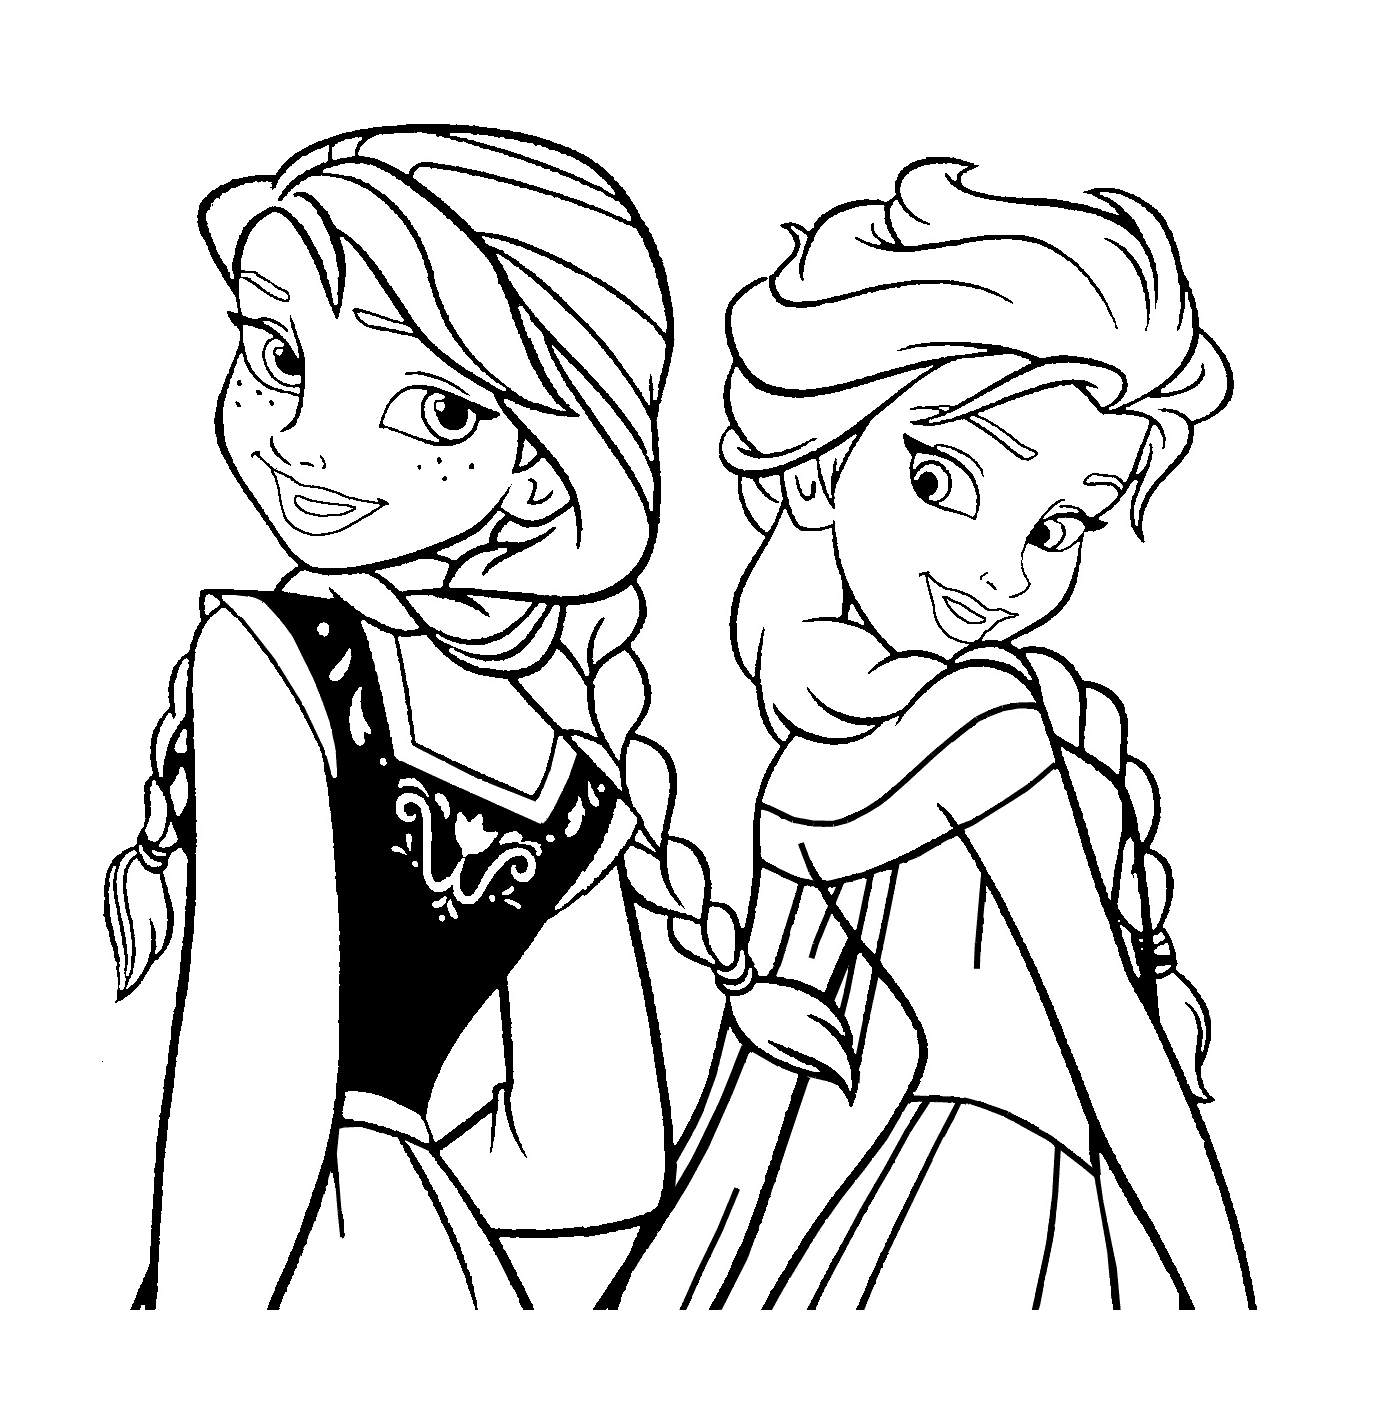  Elsa and Anna of The Snow Queen 